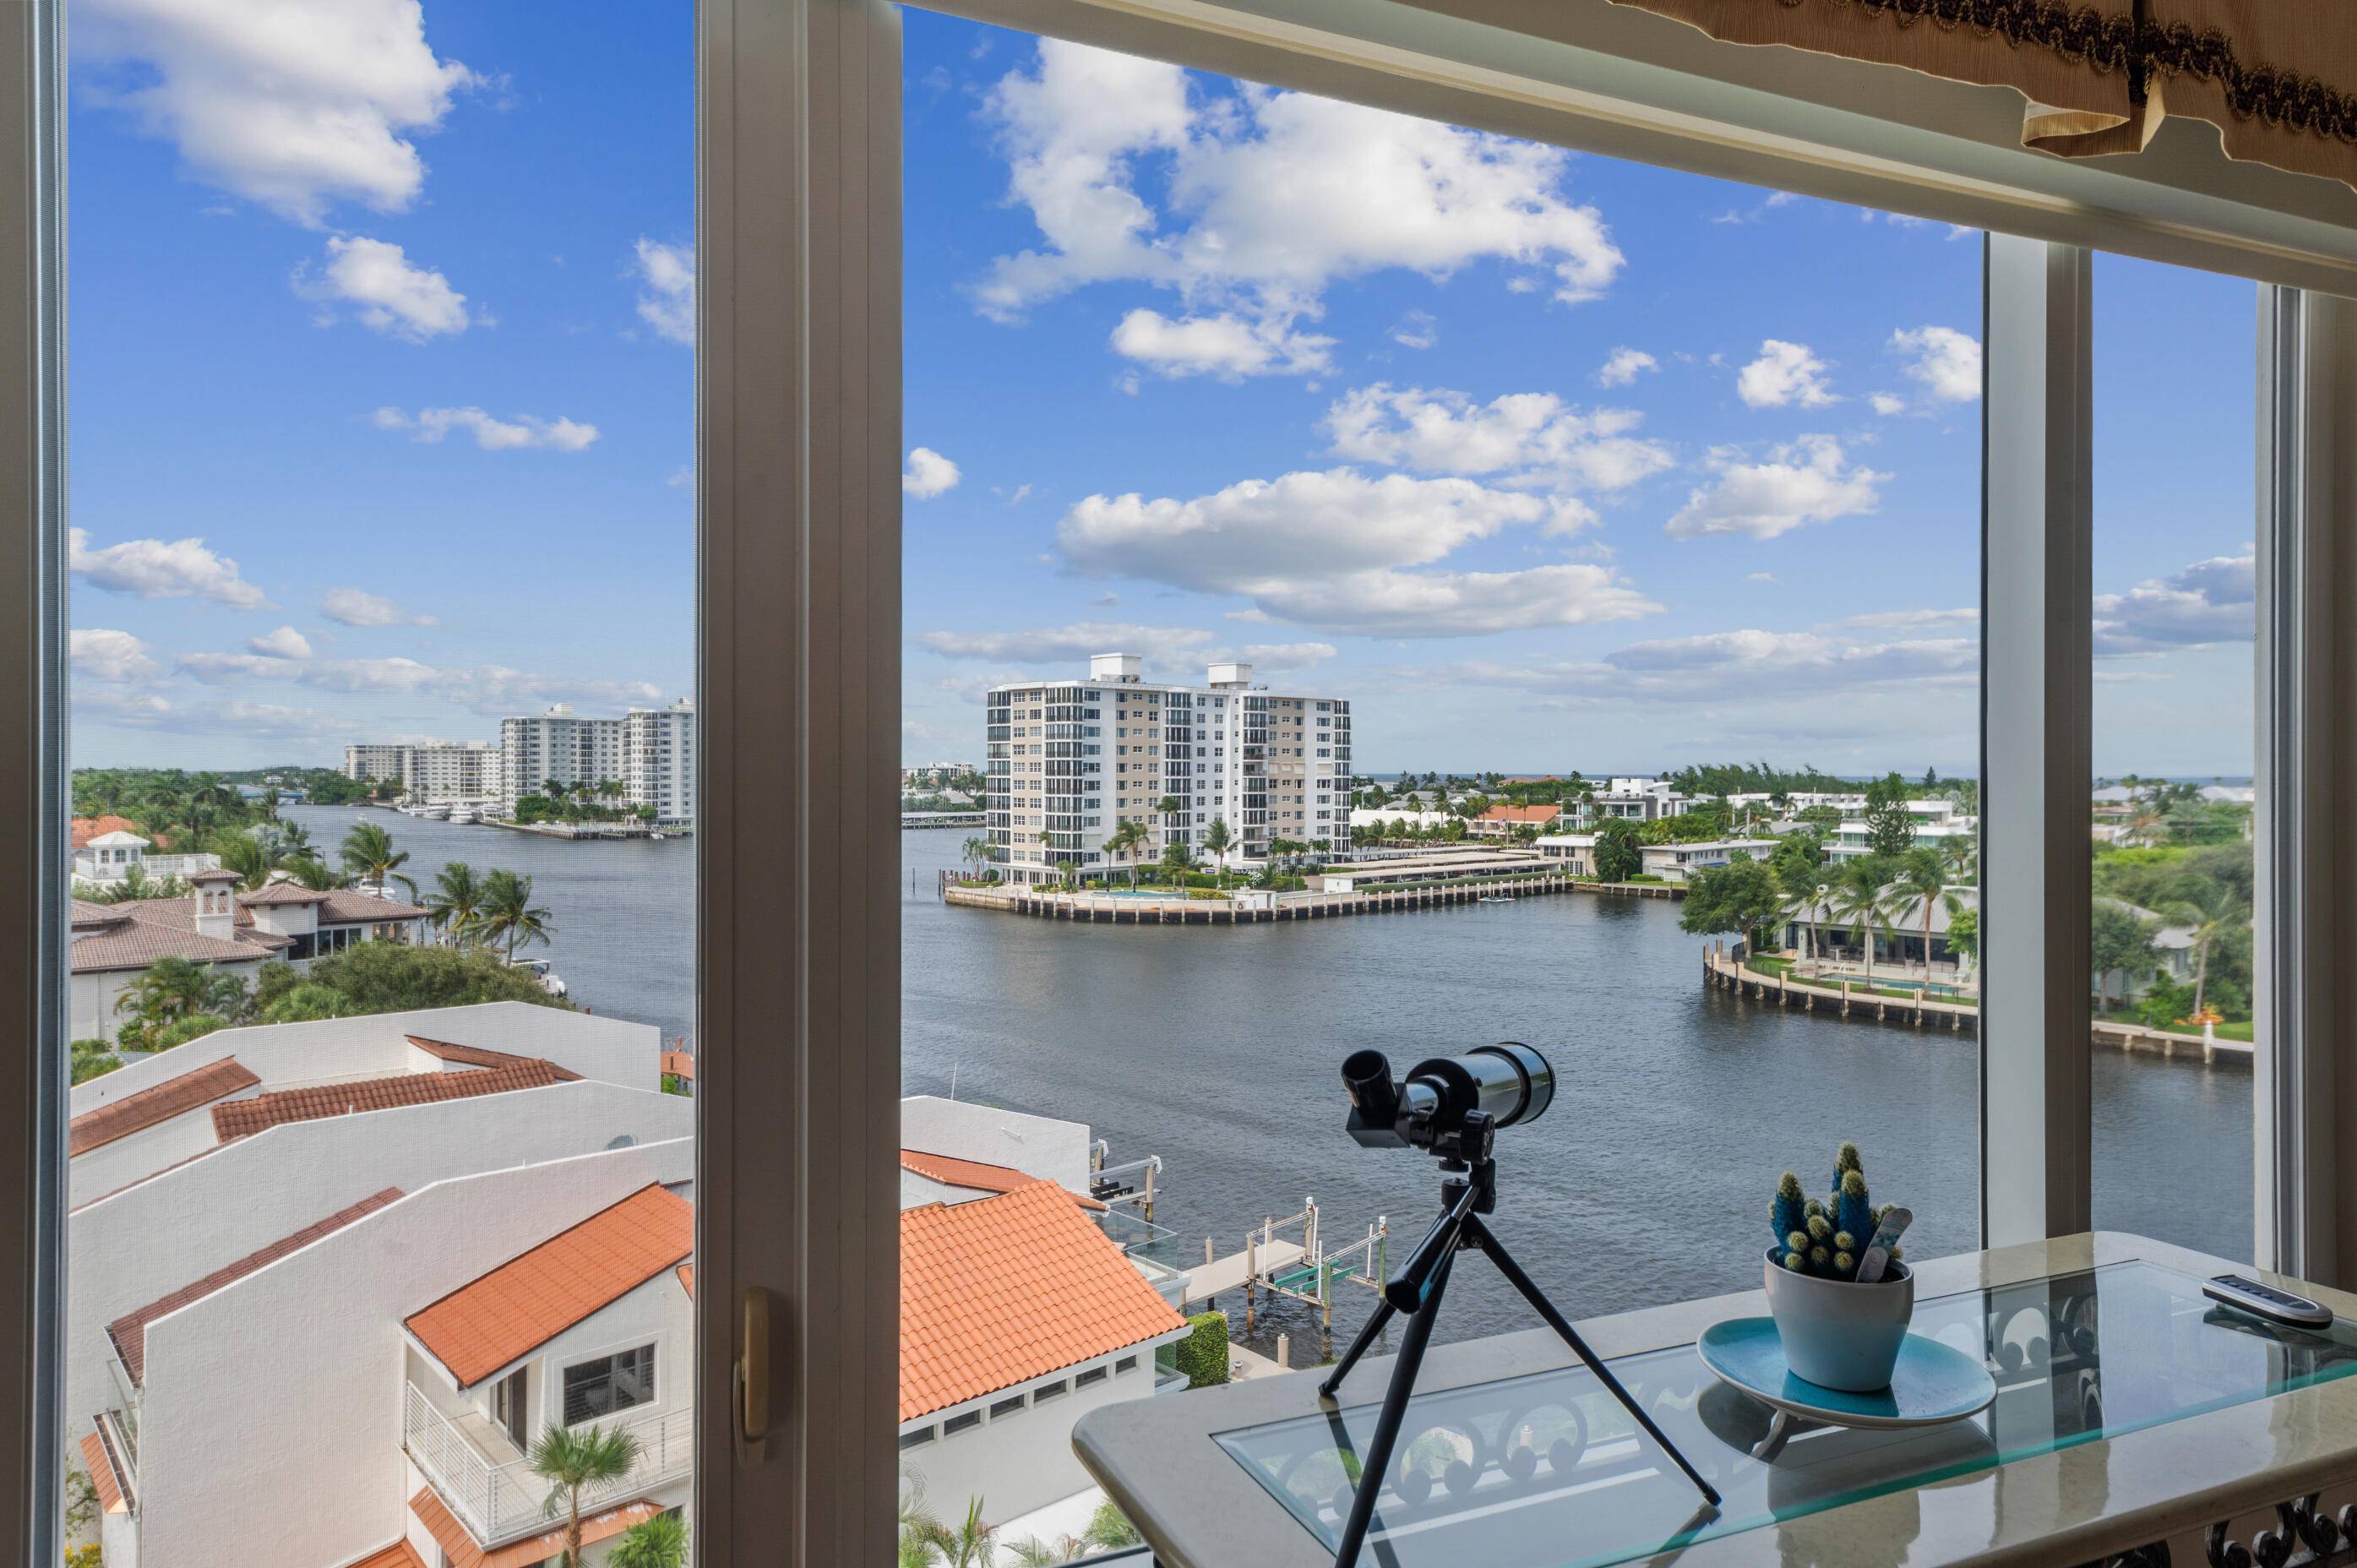 Stunning, 2 2 with a waterfront view of the Intracoastal Waterway and Atlantic Ocean.